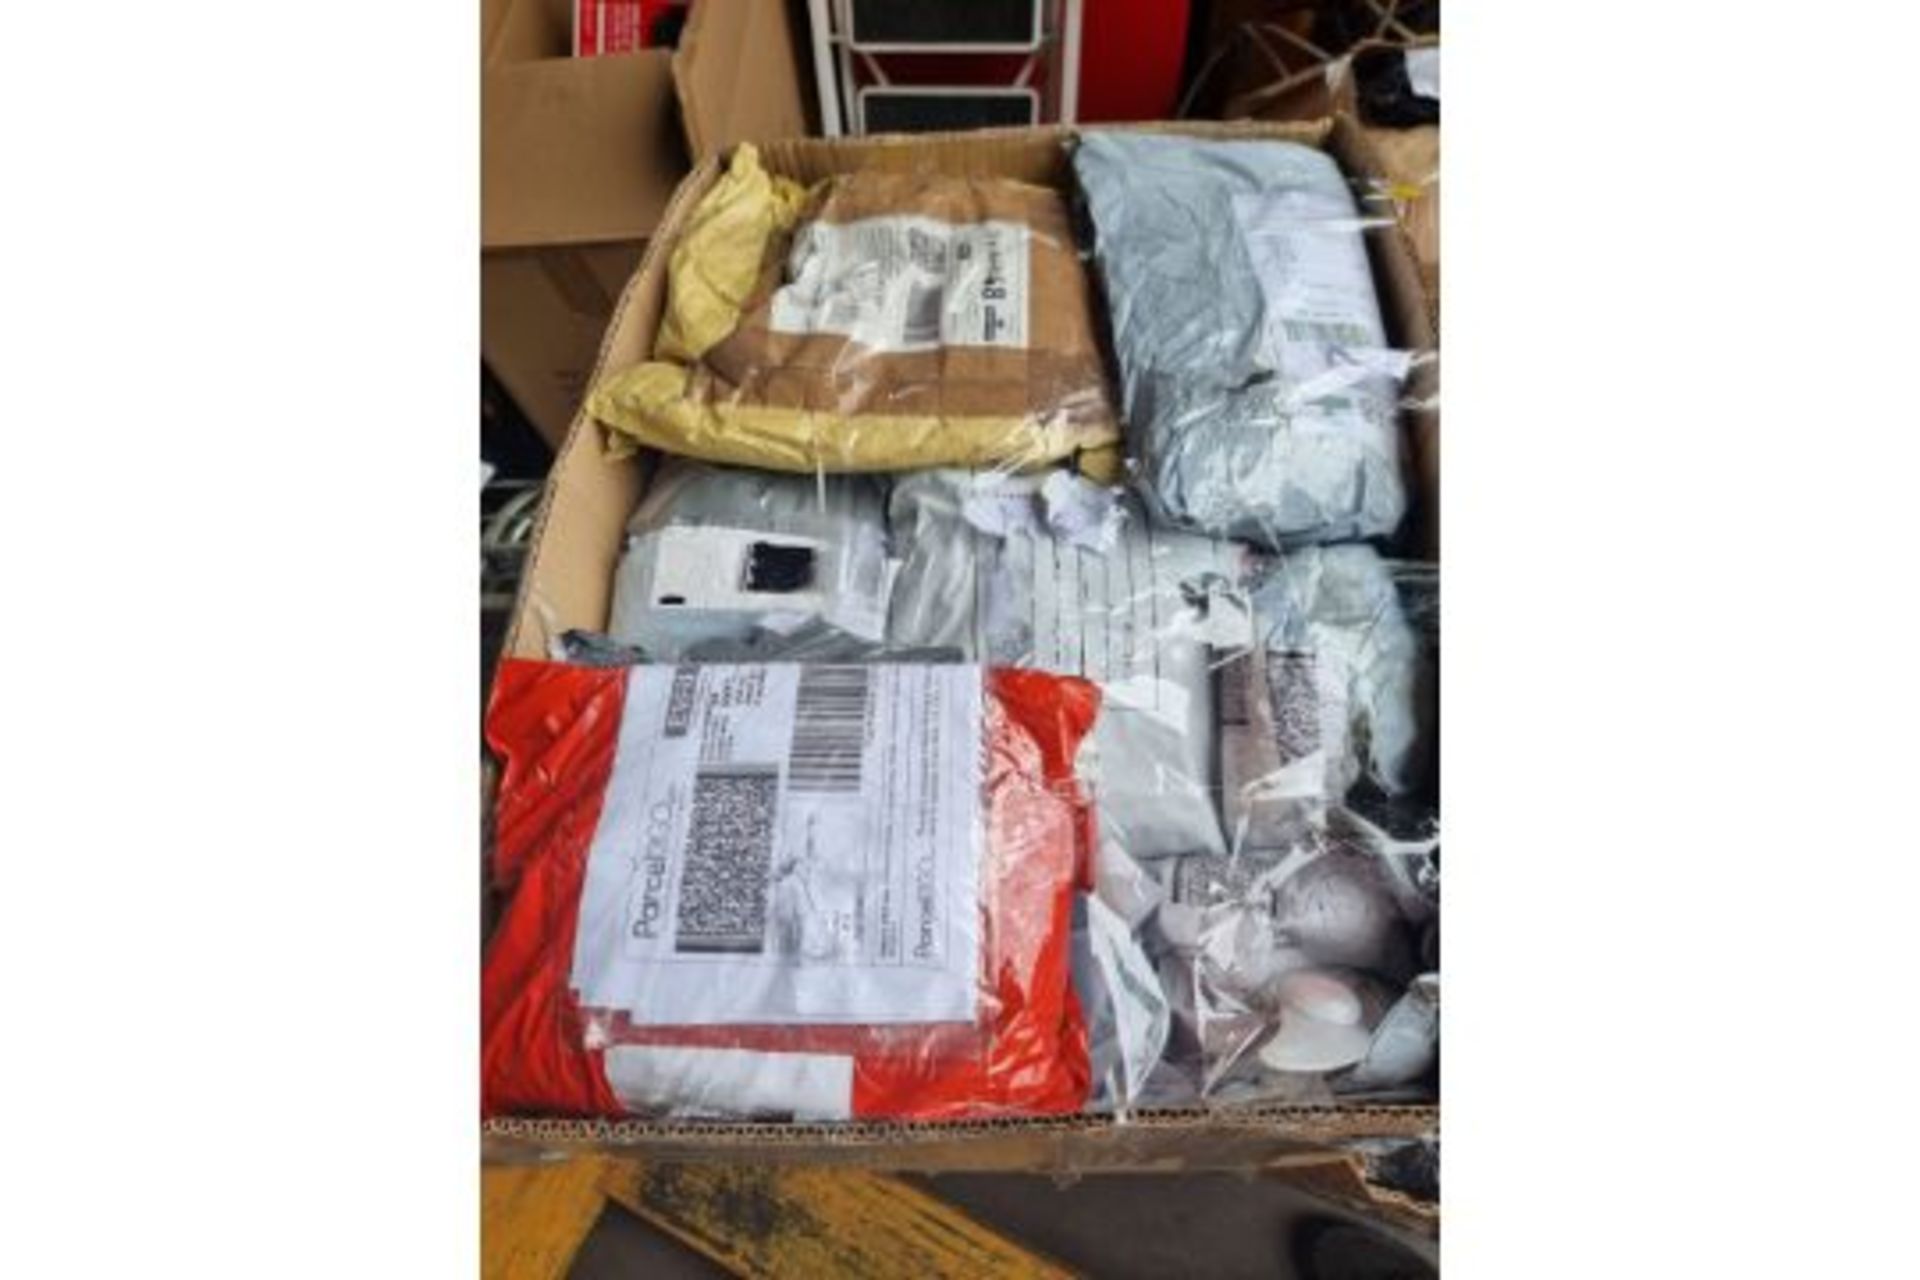 TRADE LOT TO CONTAIN 500 x UNCHECKED COURIER/INTERNET RETURNS. CONDITION & ITEMS UNKNOWN. ITEMS WILL